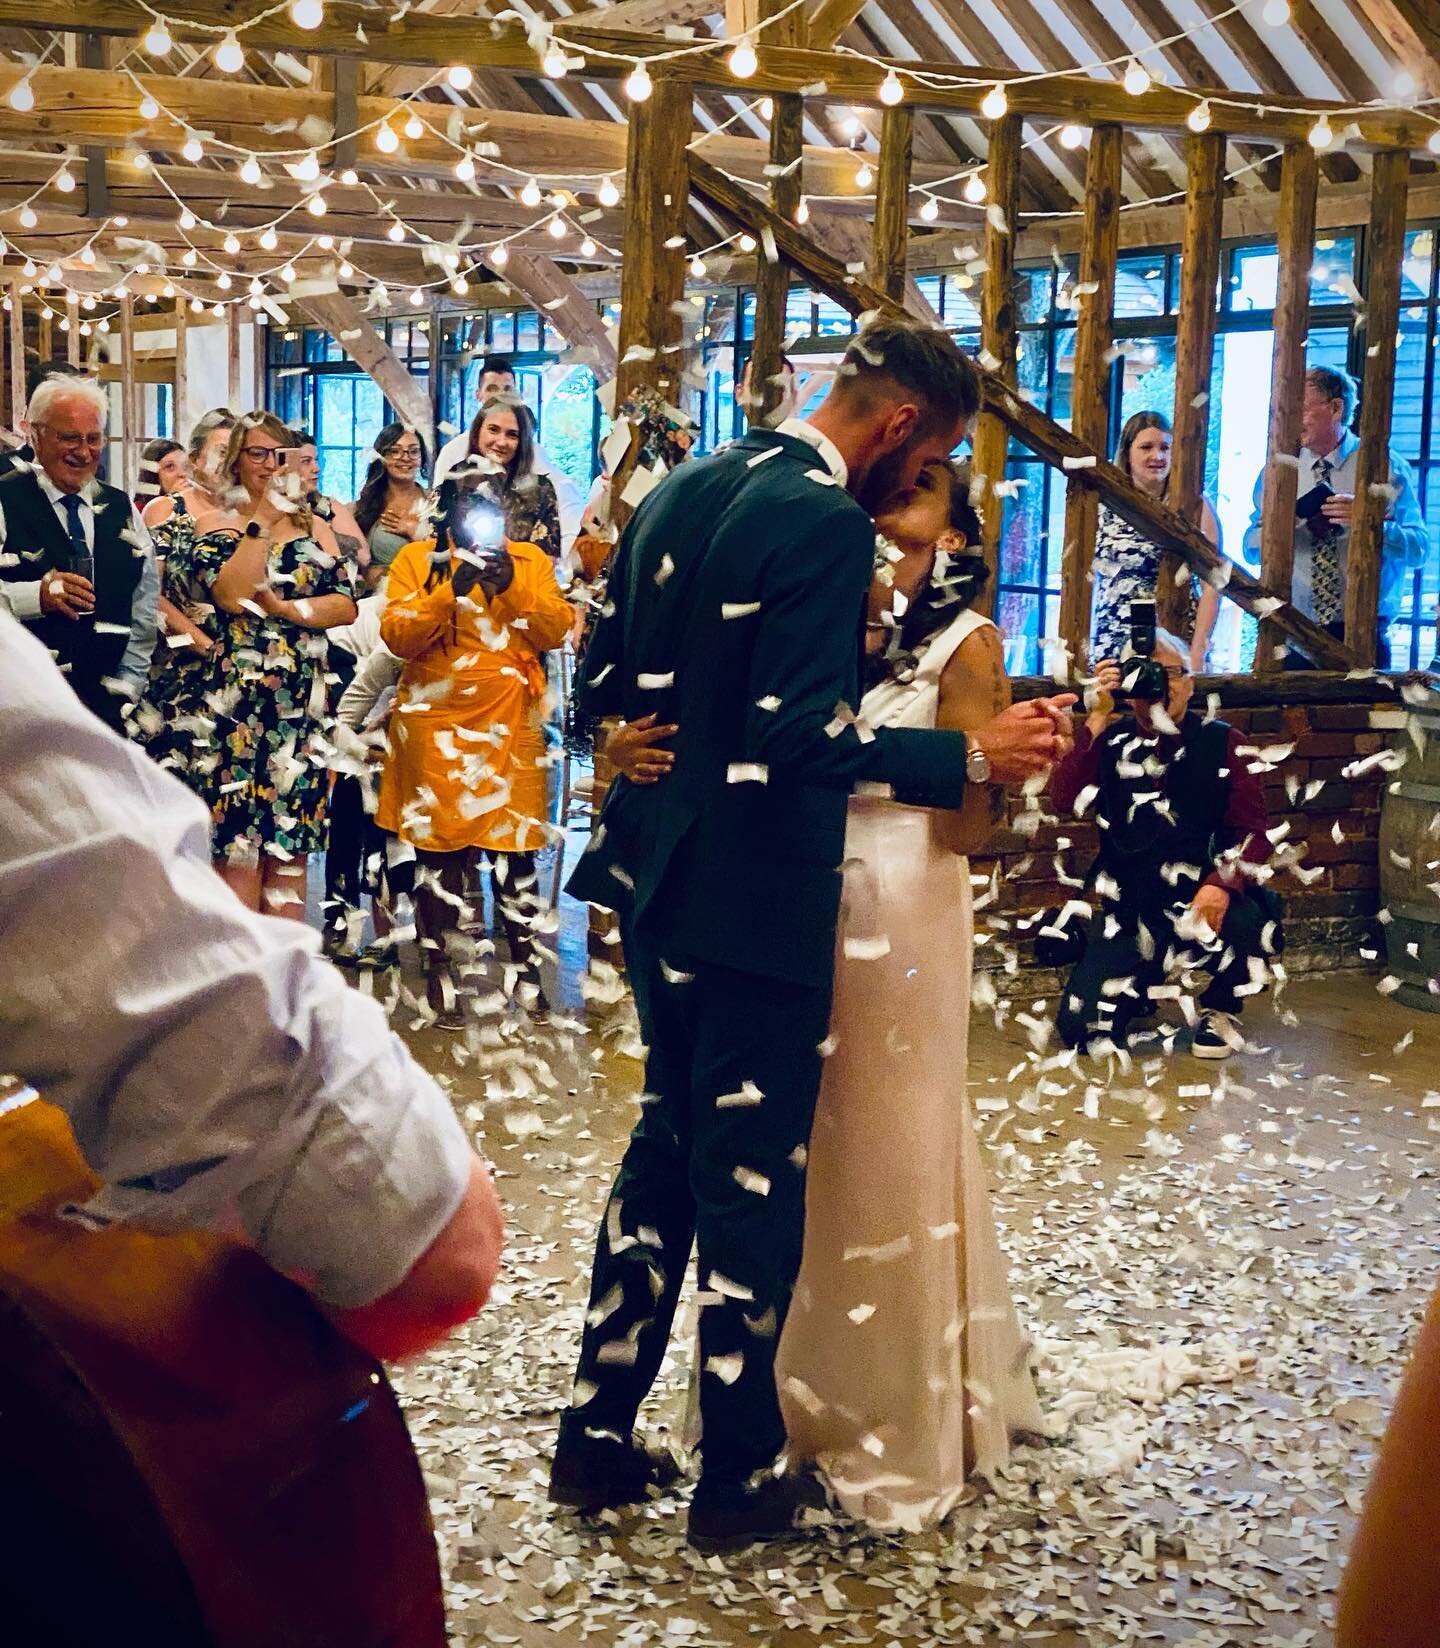 Huge congratulations to Mr &amp; Mrs Richards! It was a pleasure to be a party of your big day! We&rsquo;re still finding confetti in our instrument cases 😅

#wedding #weddingband #rockit #rockitband